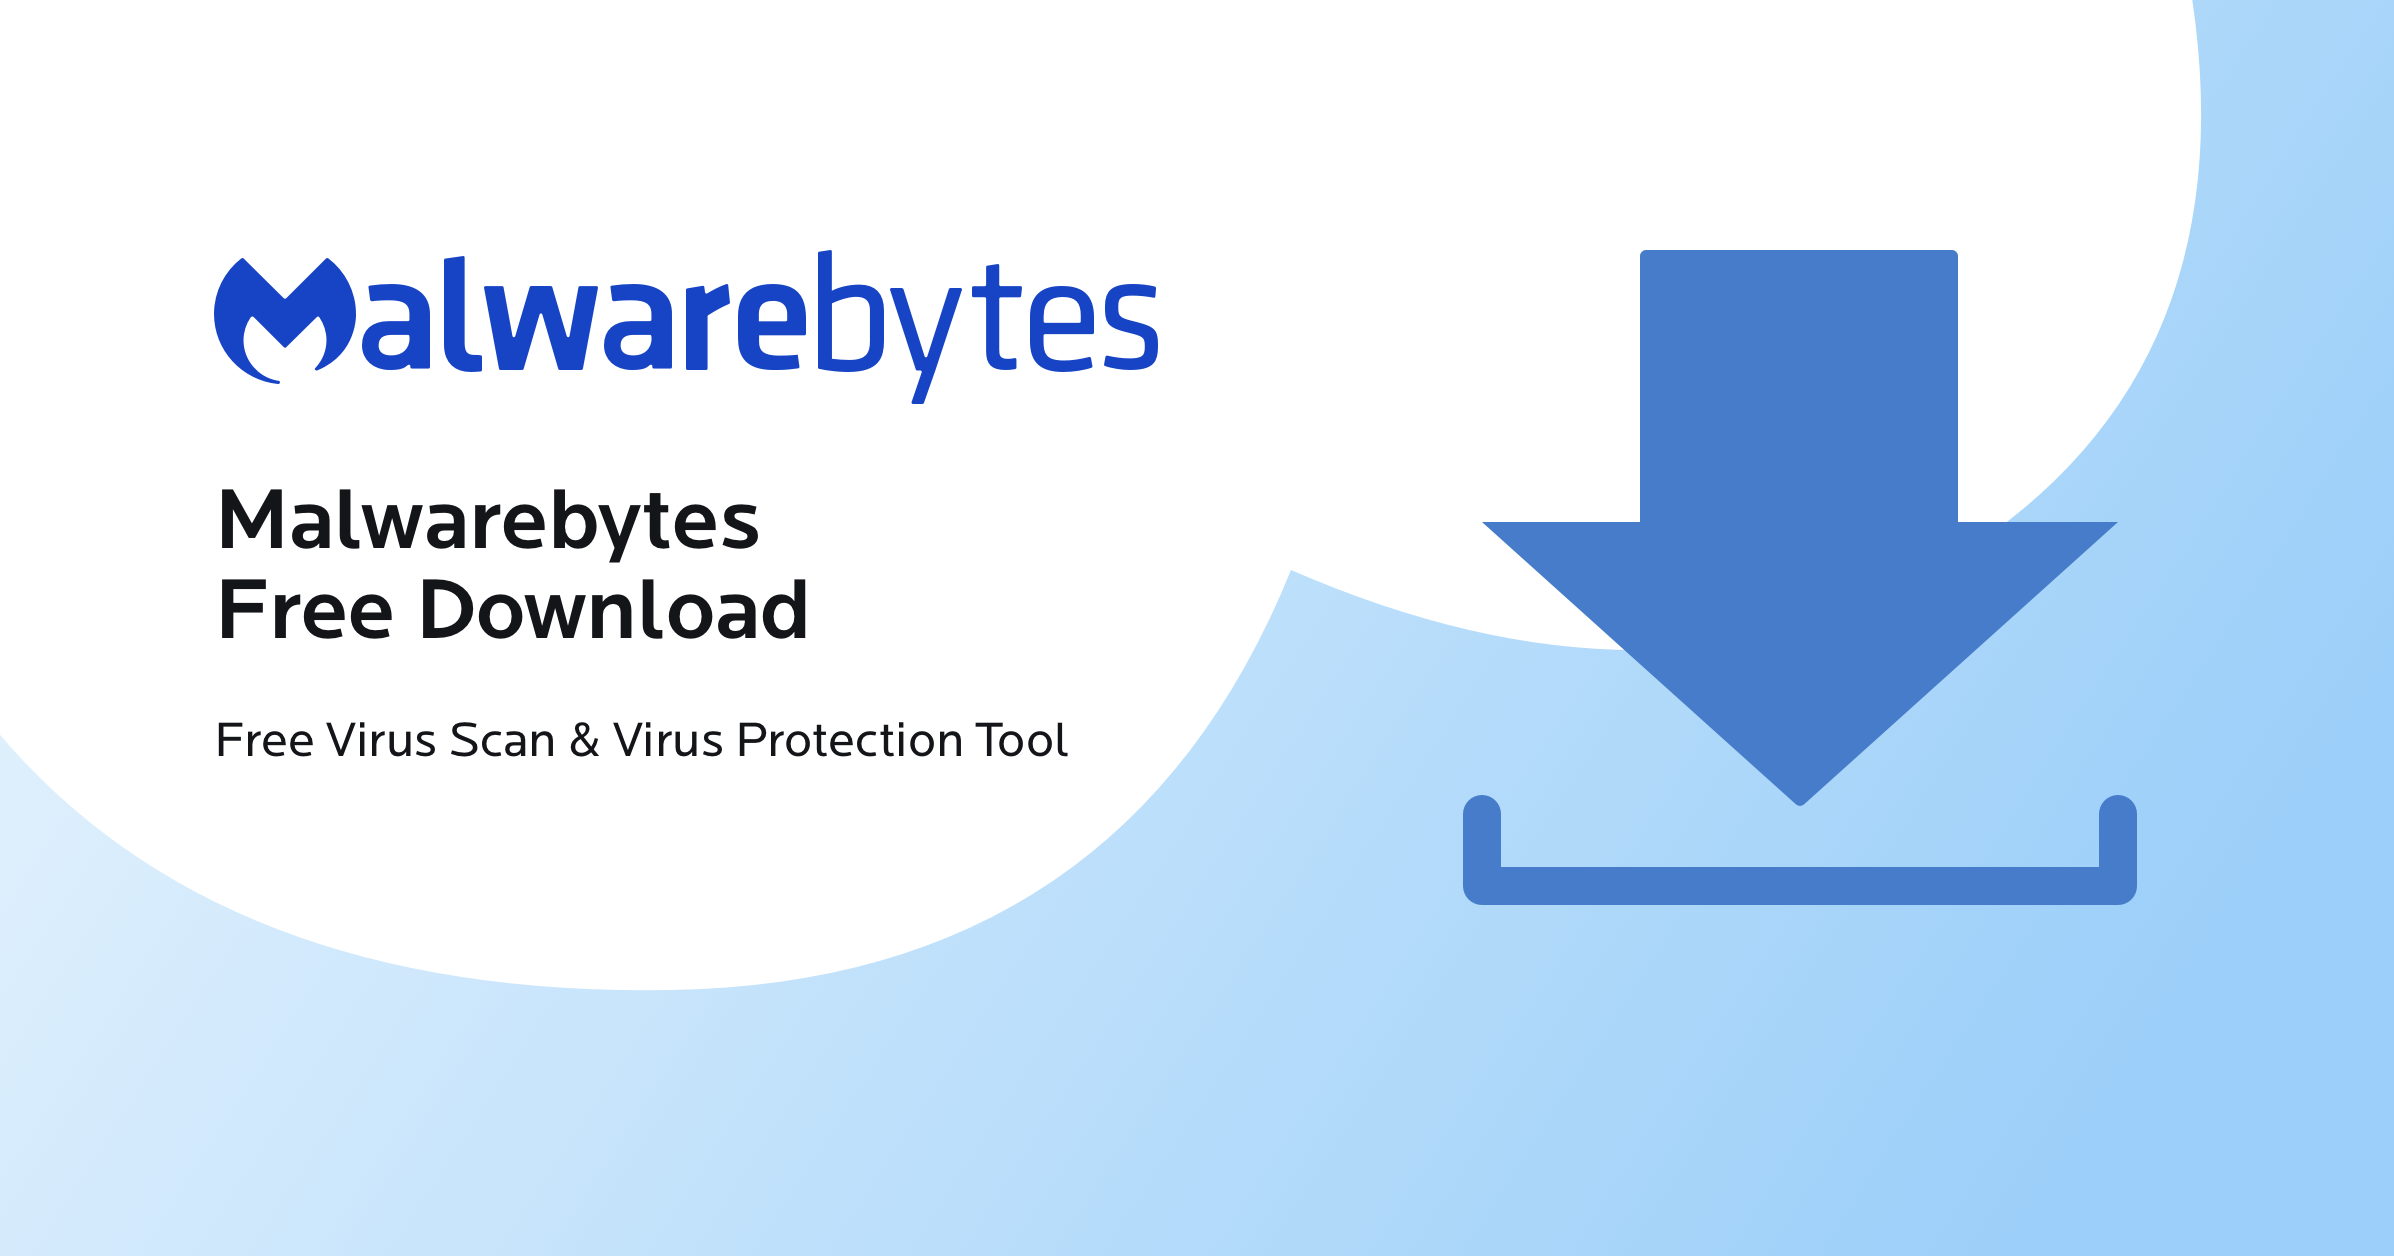 Download and install a trusted anti-malware software, such as Malwarebytes
Run a full system scan to detect and remove any malware